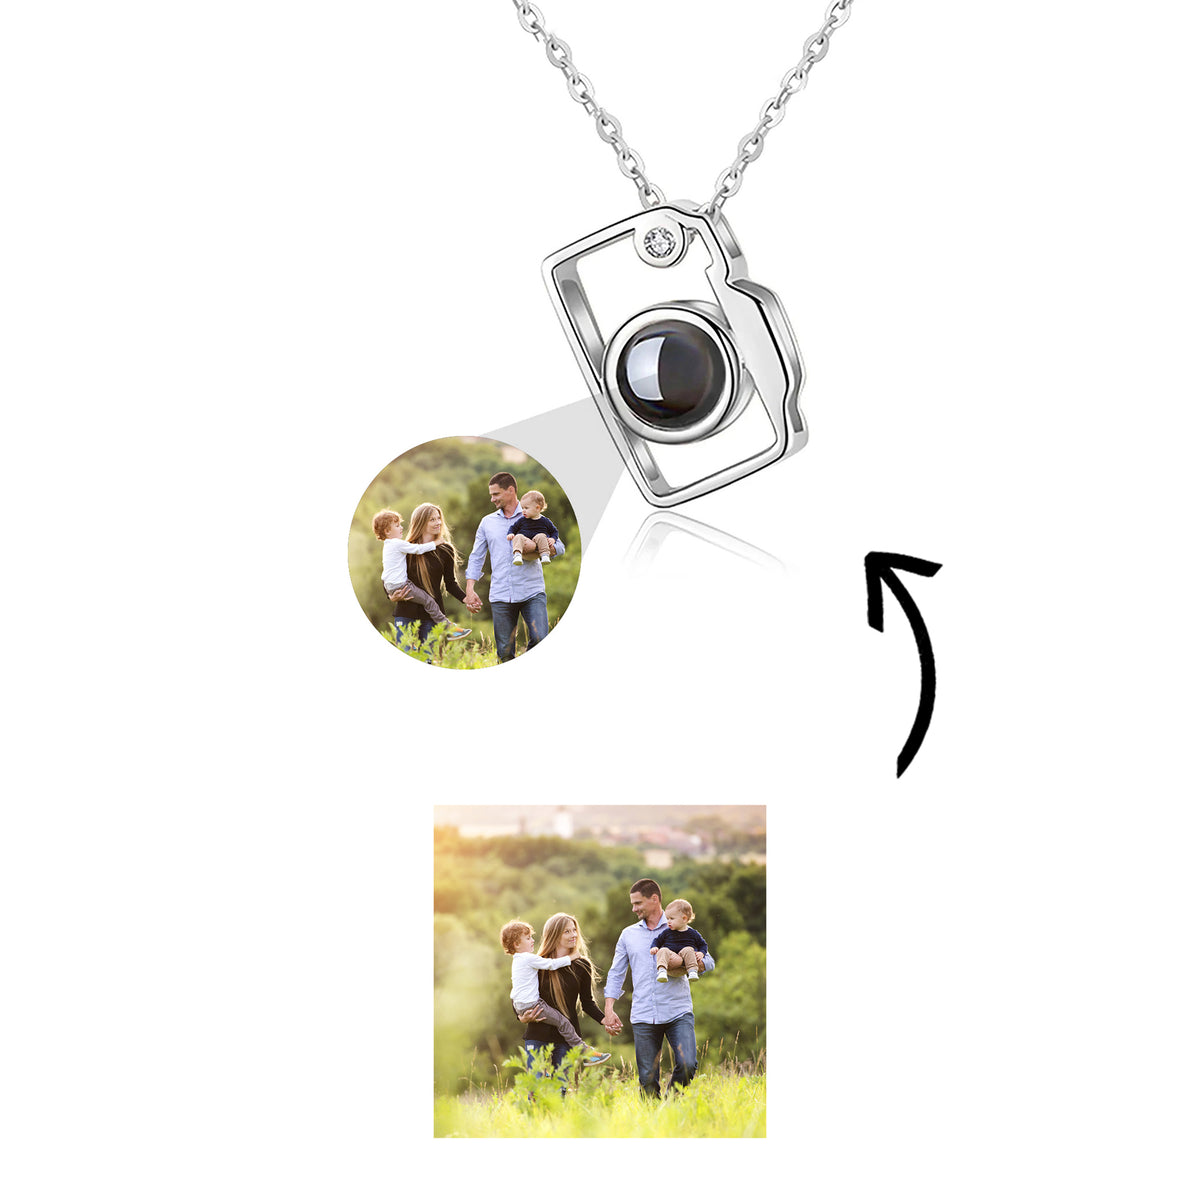 Camera Projection Necklace